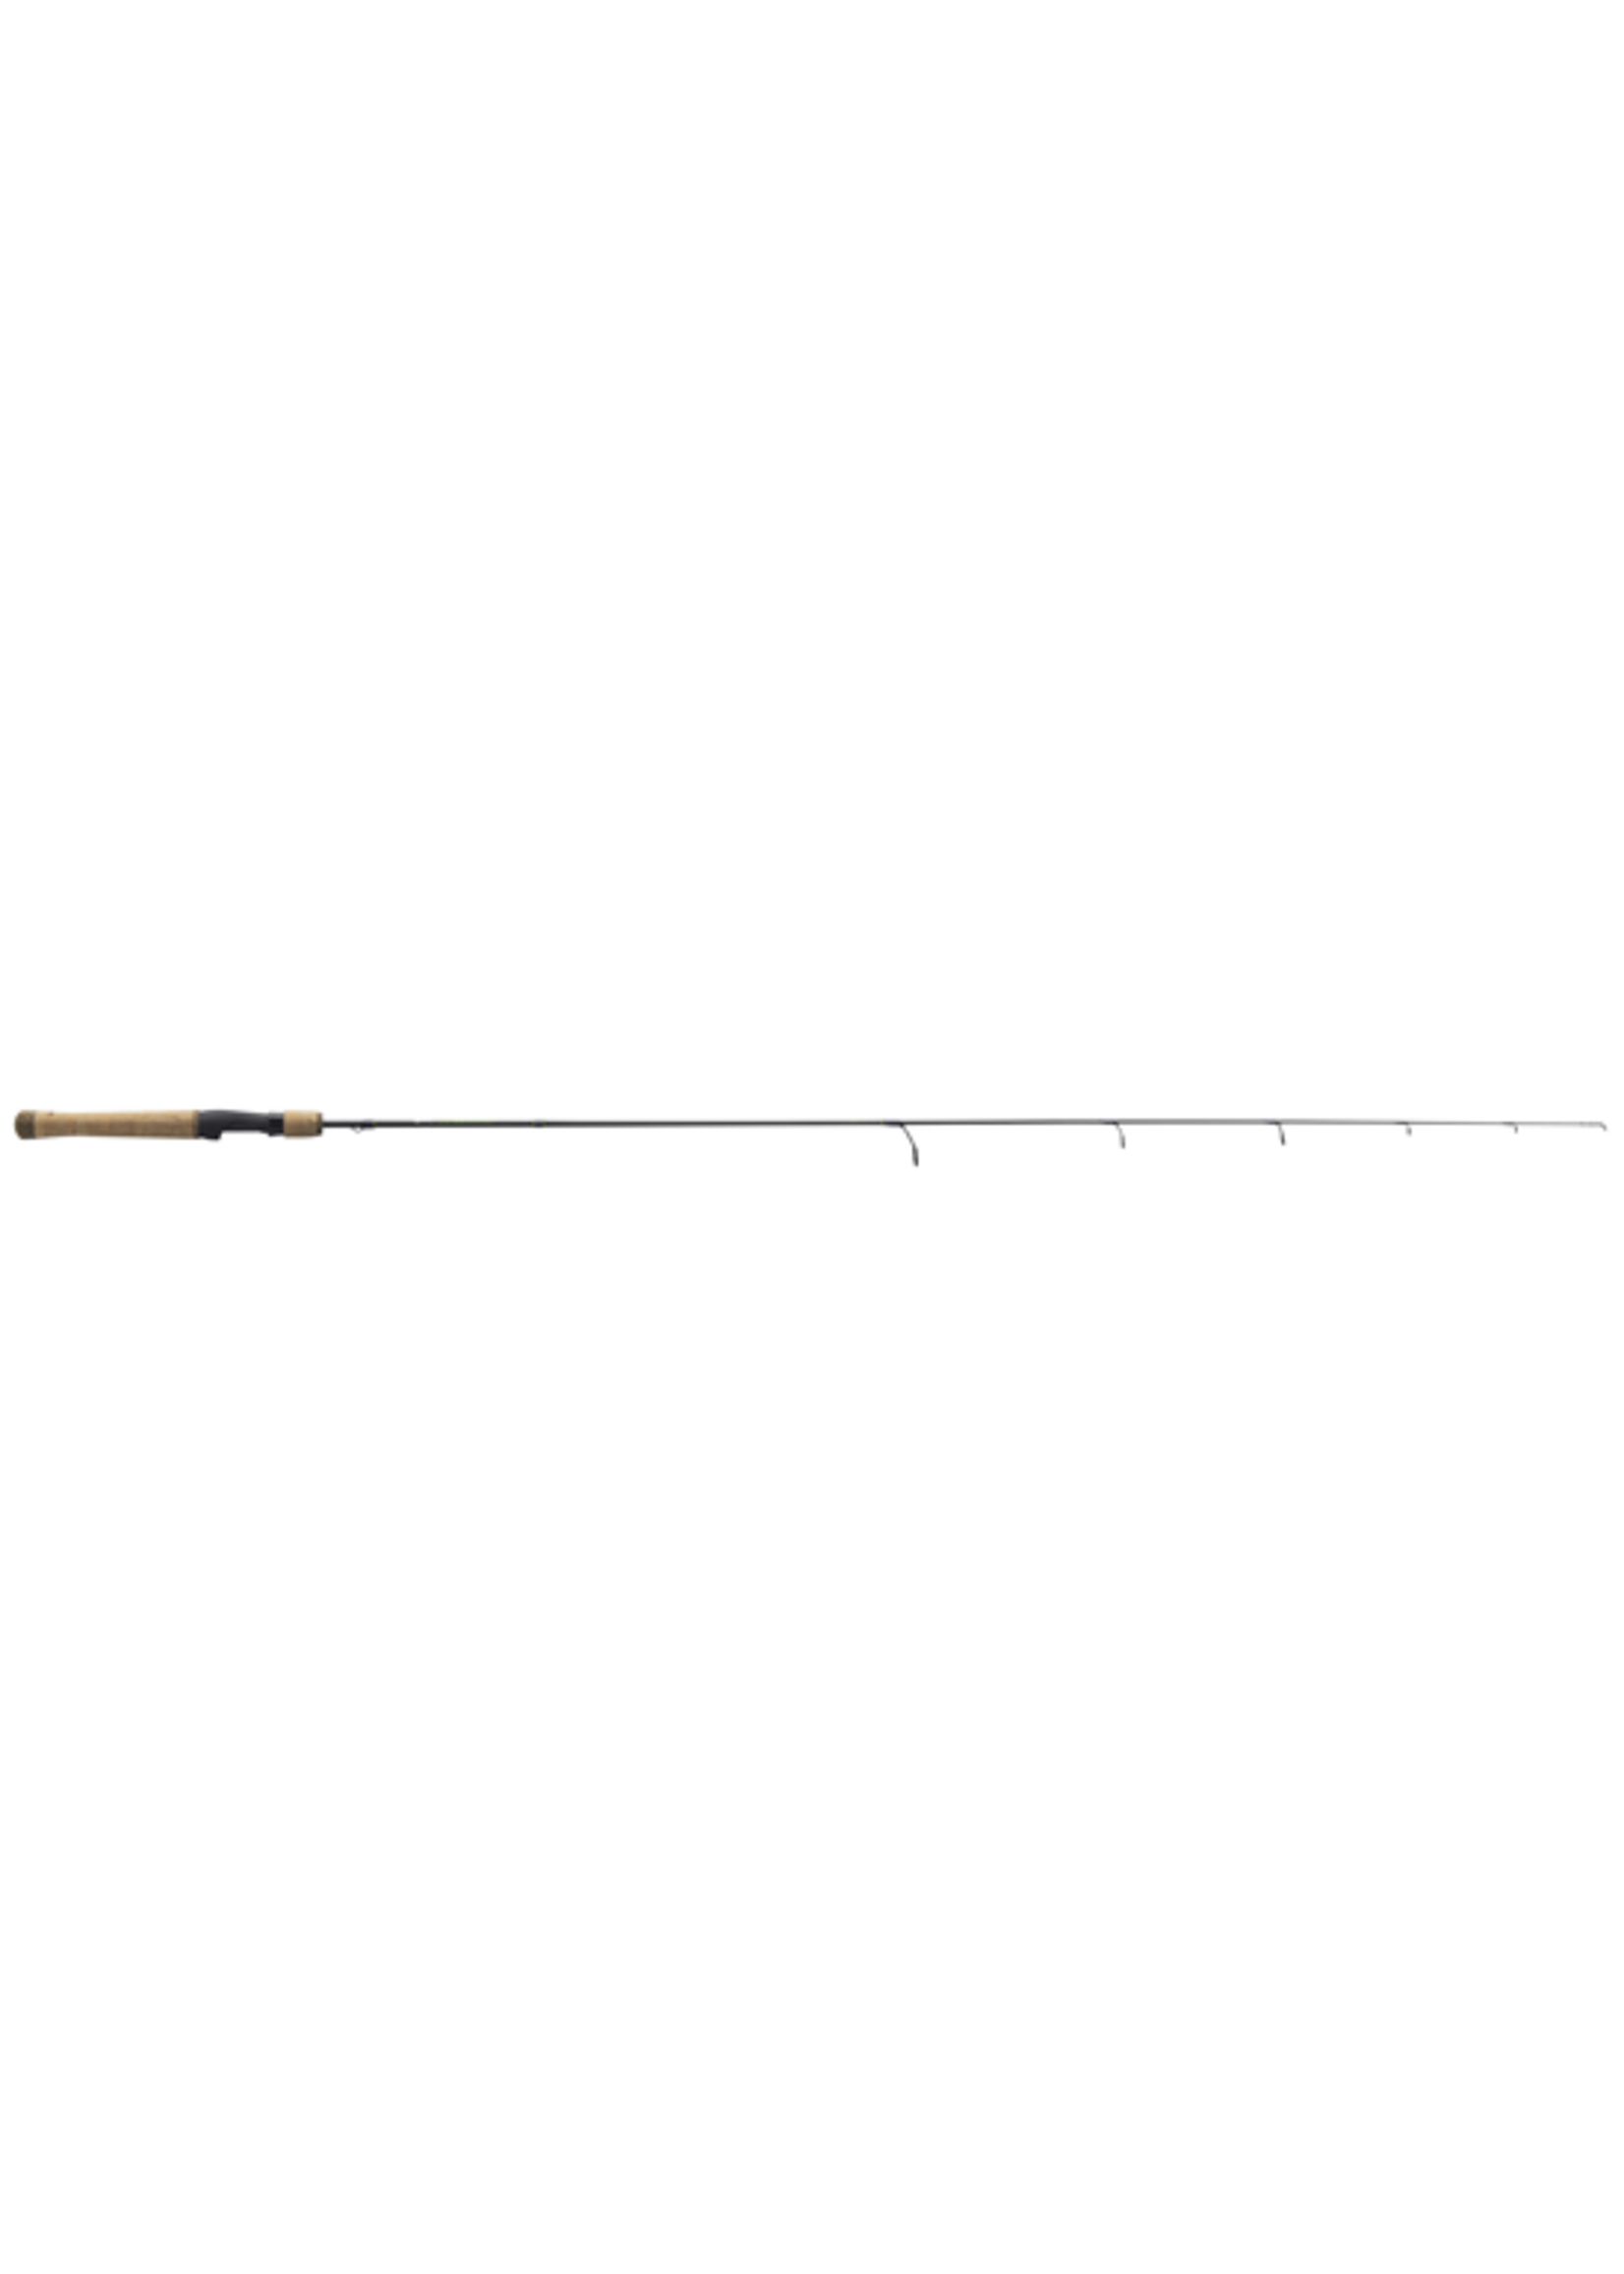 Lew's Lew's Speed Stick Series Spinning Rod